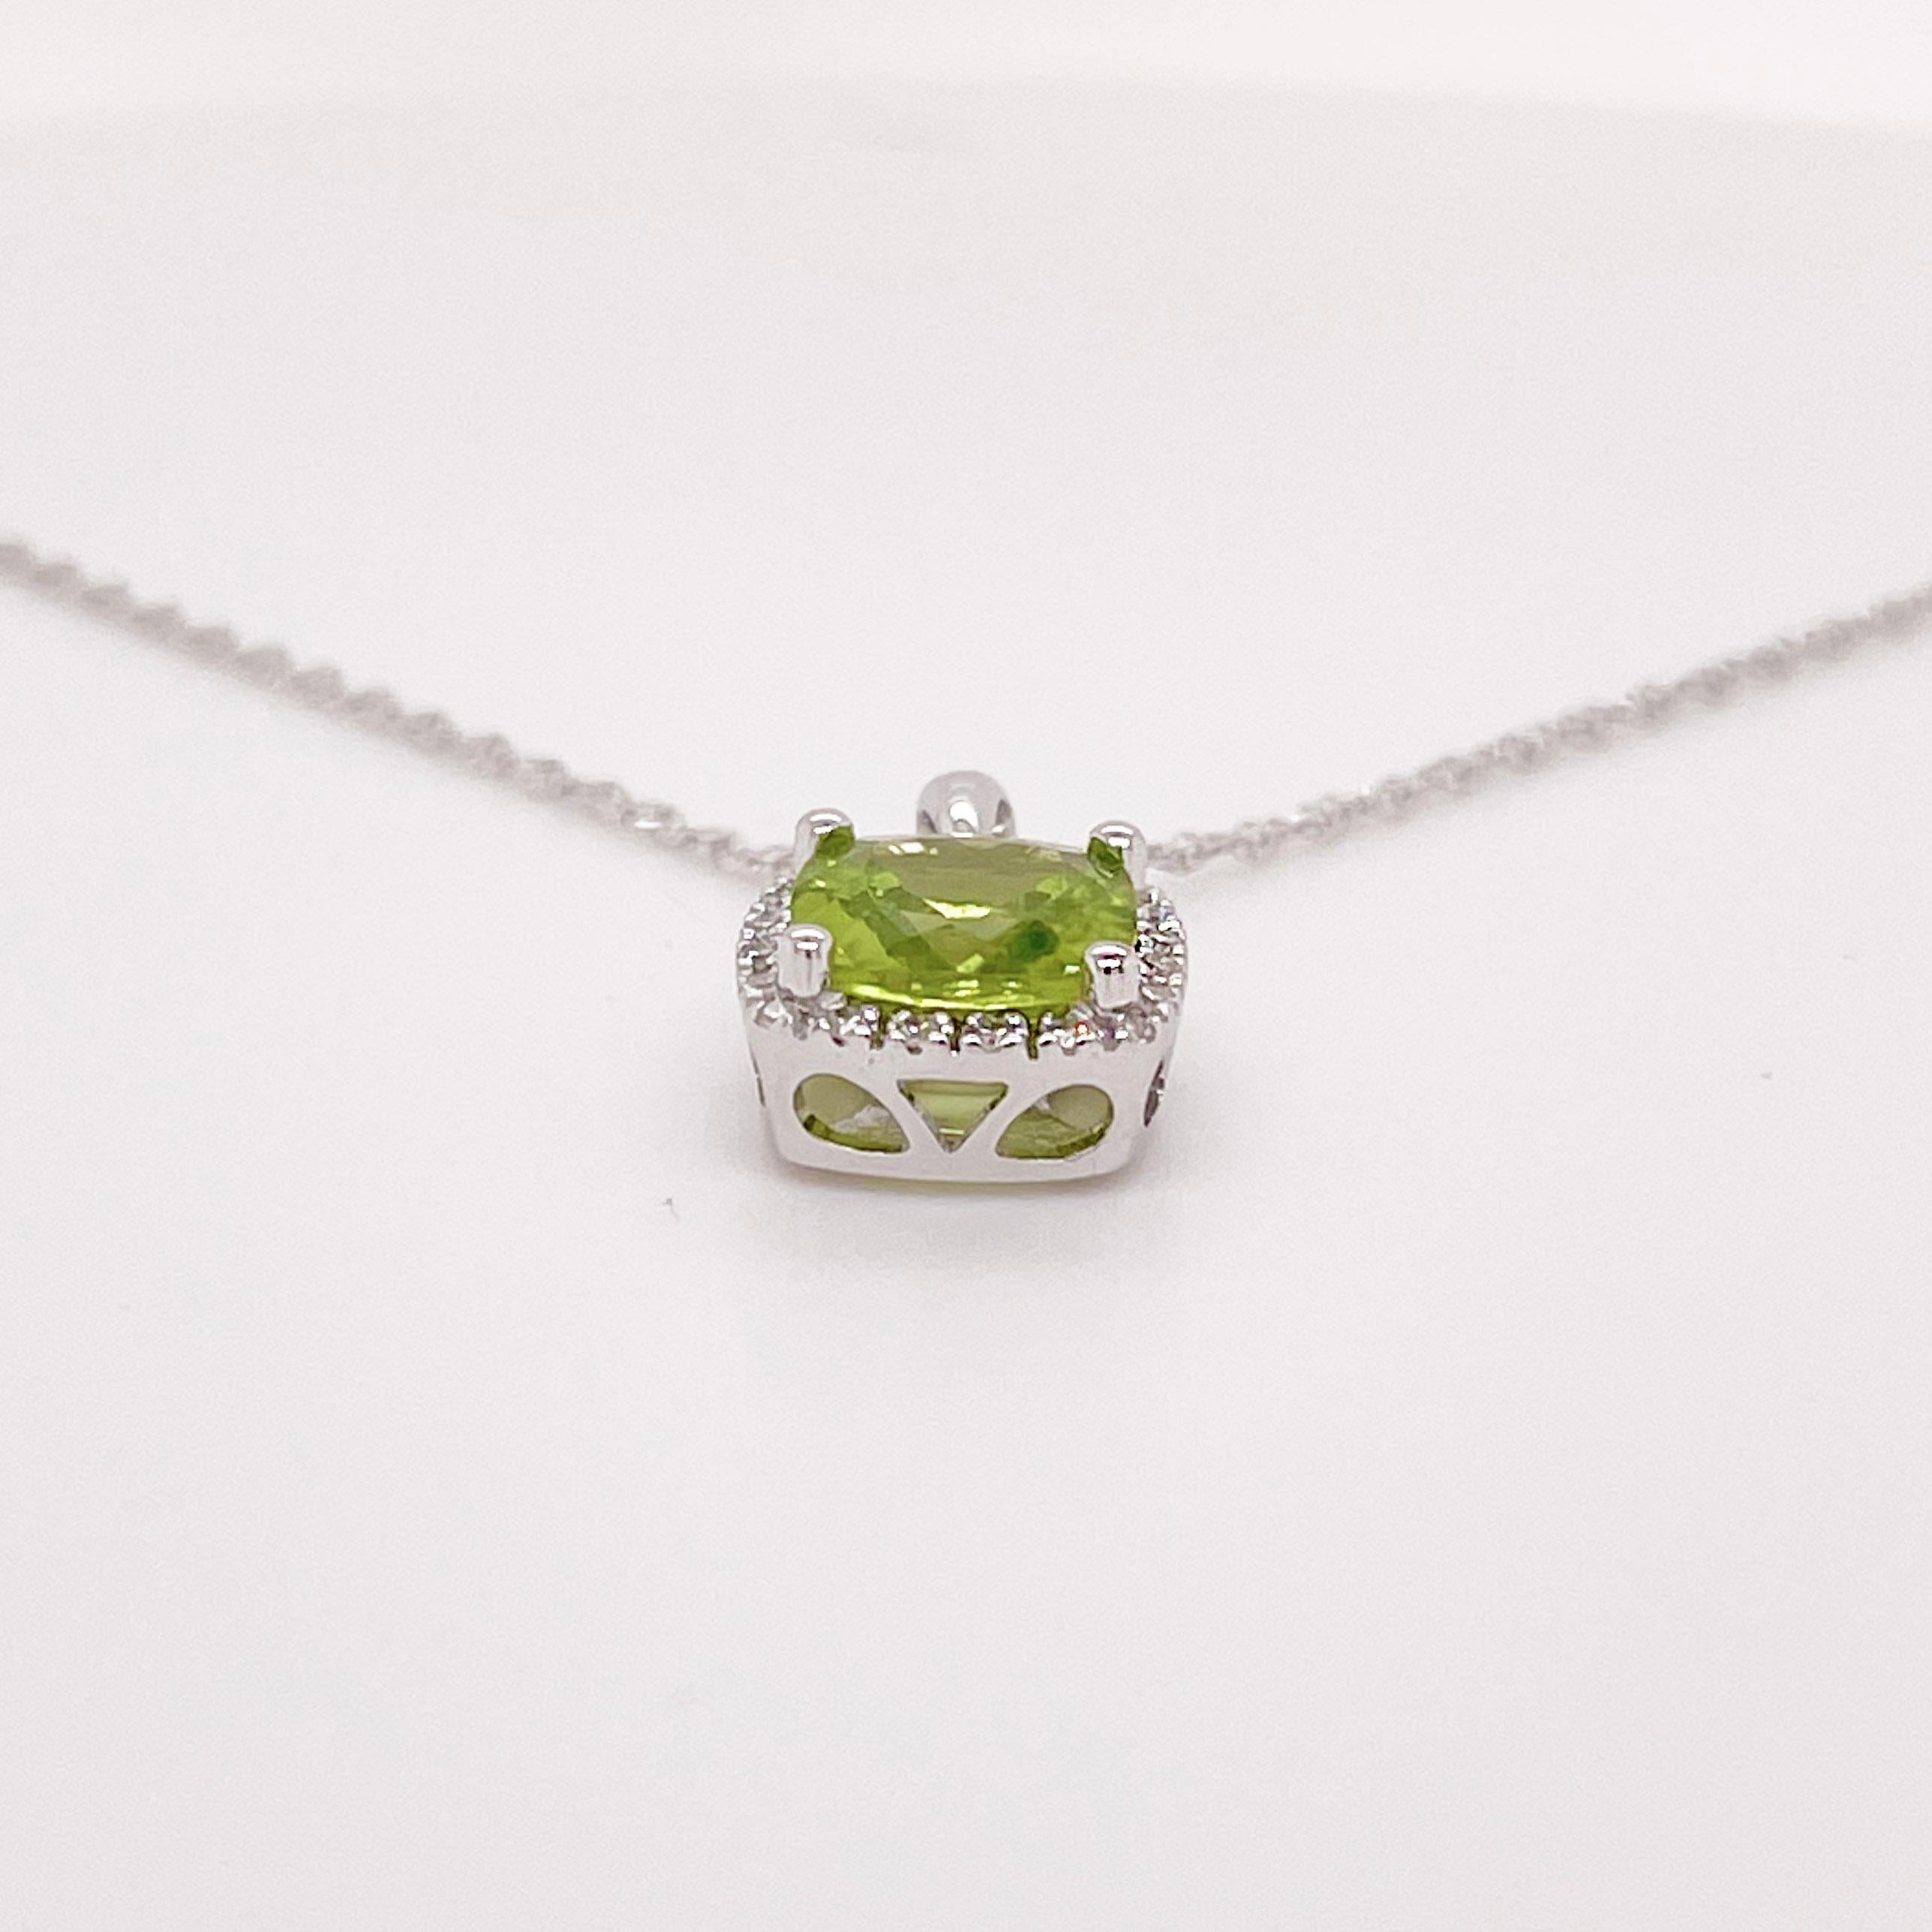 The perfect jewelry for any August celebration! This peridot and diamond pendant is made with a genuine, natural peridot gemstone and genuine, natural diamonds. This pendant is solid 14k gold but lightweight and comfortable to wear! Do you have a